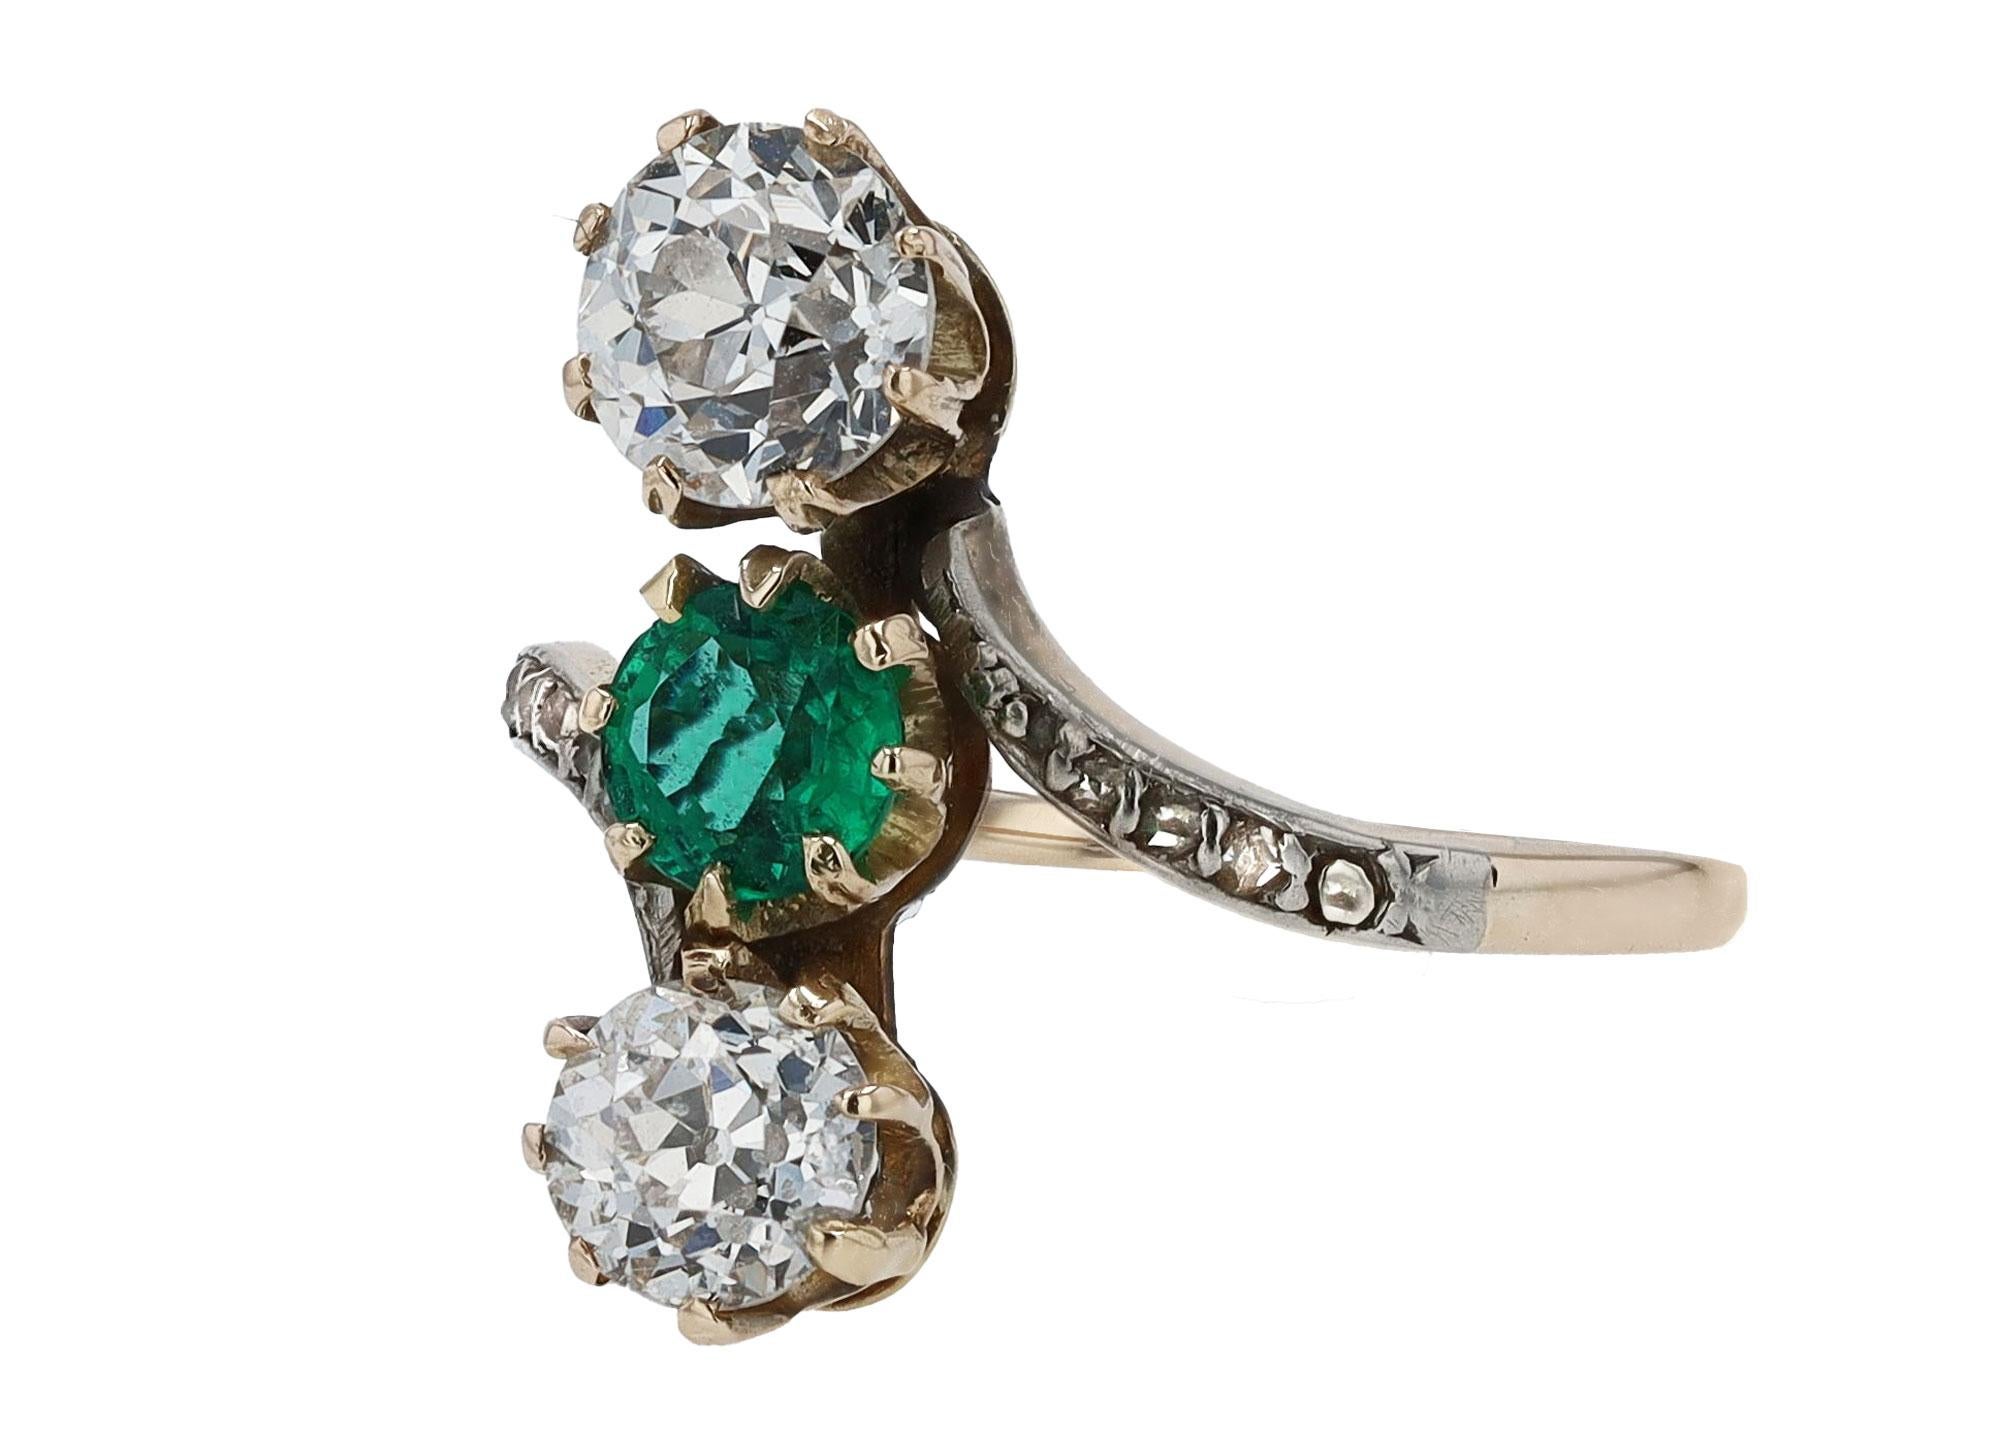 A mesmerizing trio of diamonds and an emerald form this fabulous 3 stone antique Edwardian engagement ring. The vertical orientation maximizes your finger length along with a dramatic, sinuous silhouette showcasing  a duet of old European cut